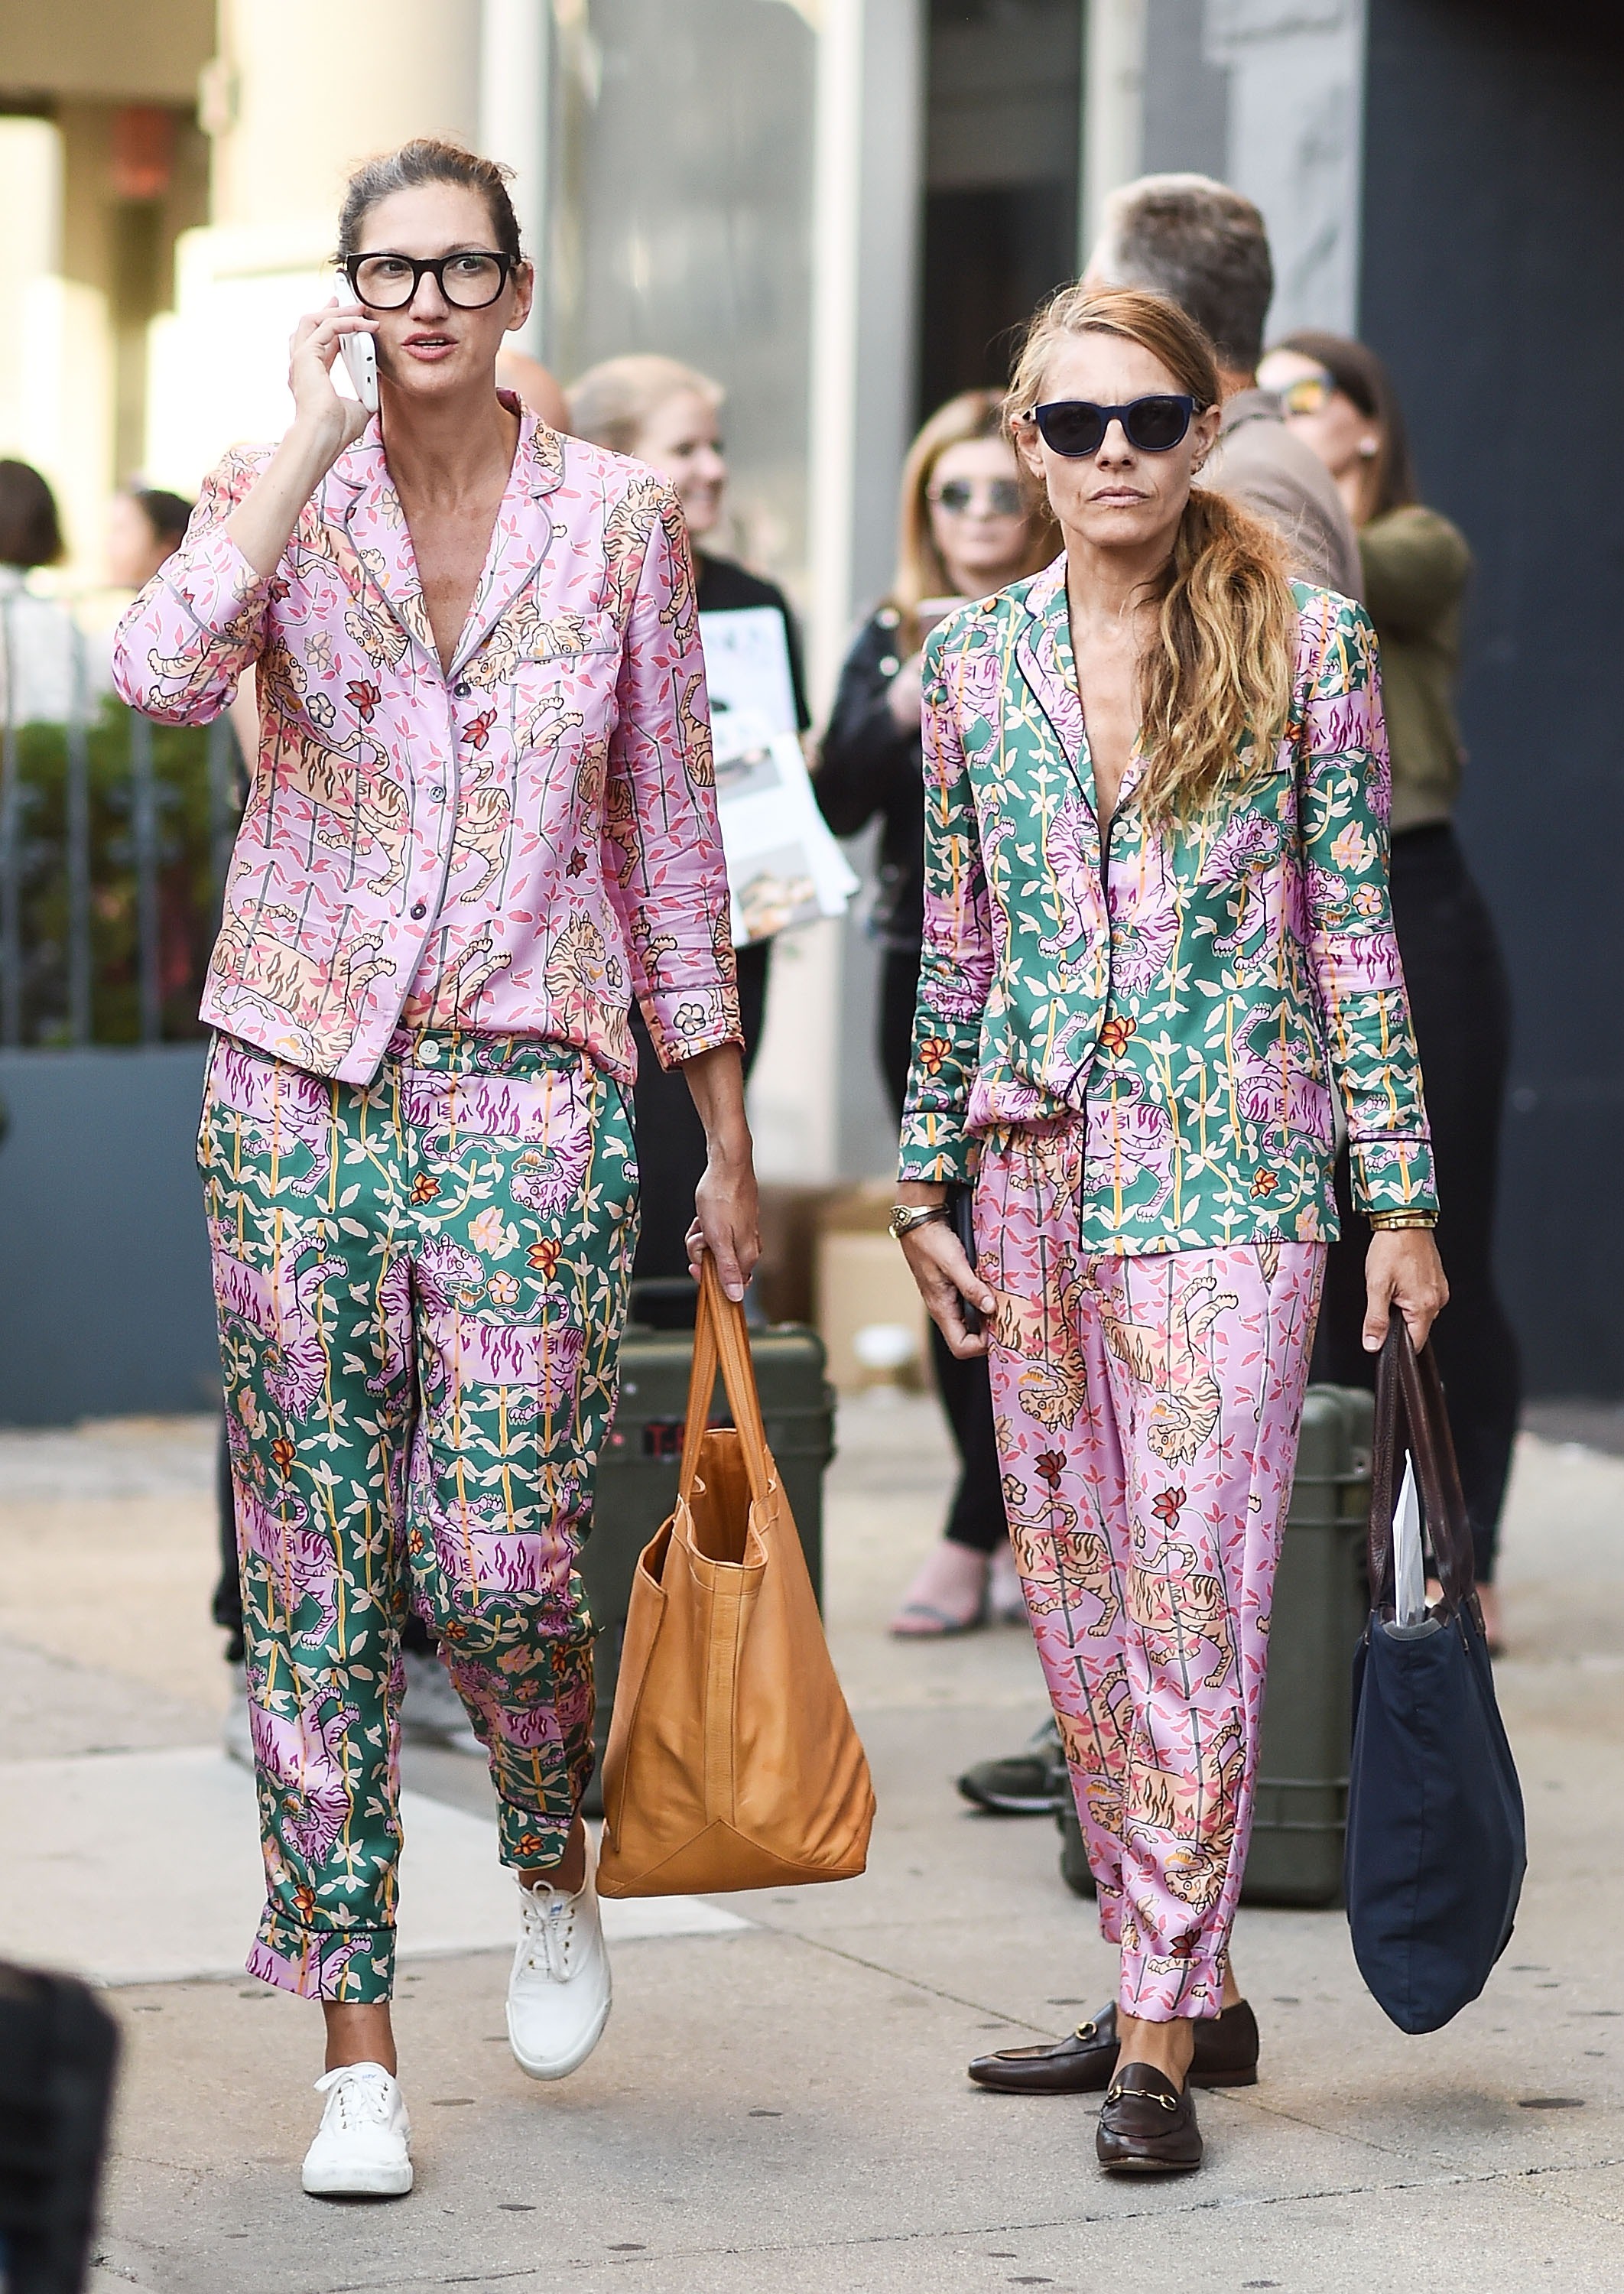 Jenna Lyons and Courtney Crangi mixed and matched a floral pajama set to perfection.